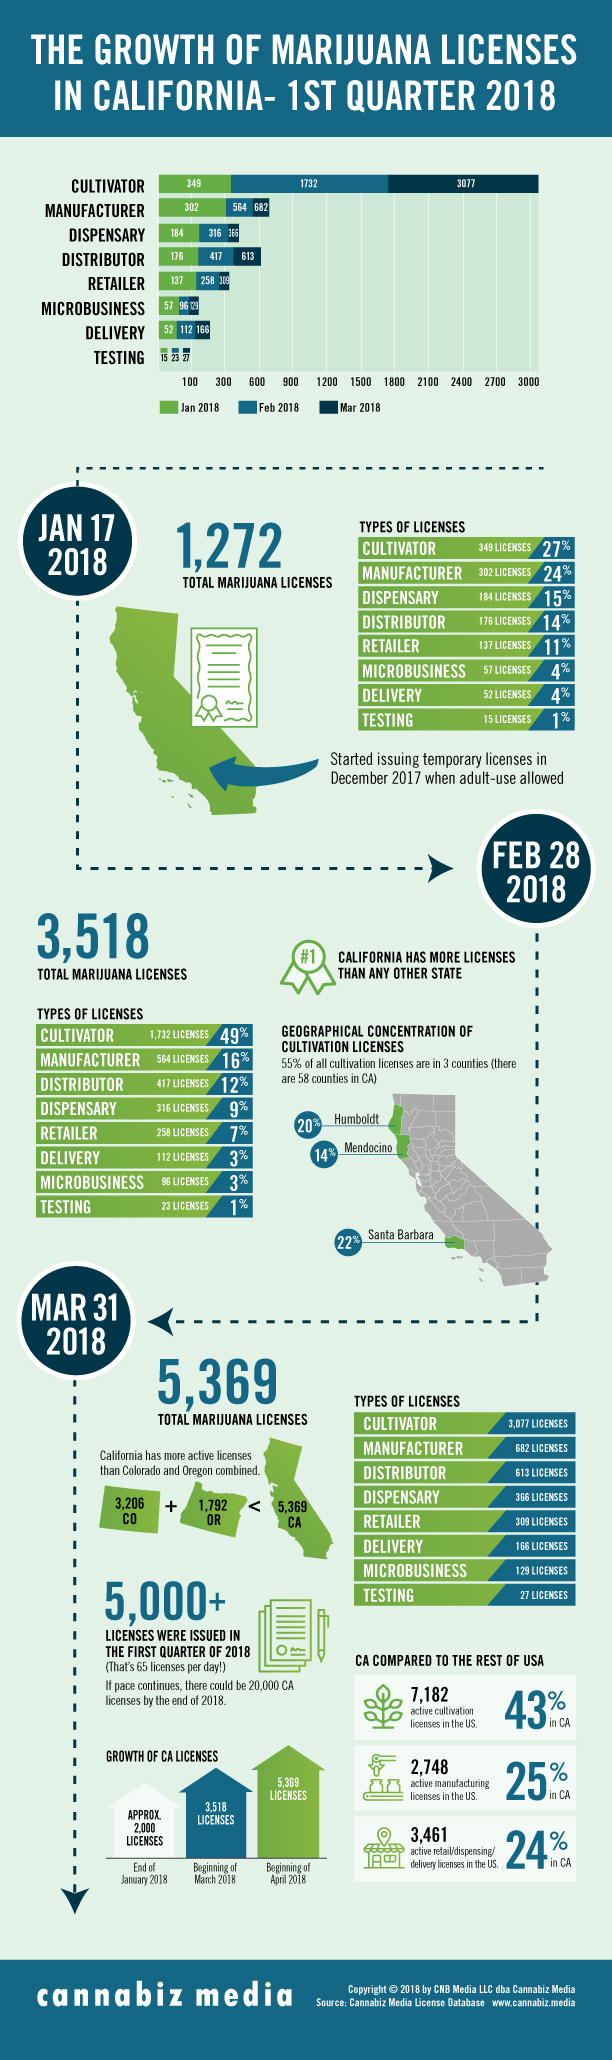 Infographic Design for Cannabis LIcenses in California Q1 of 2018